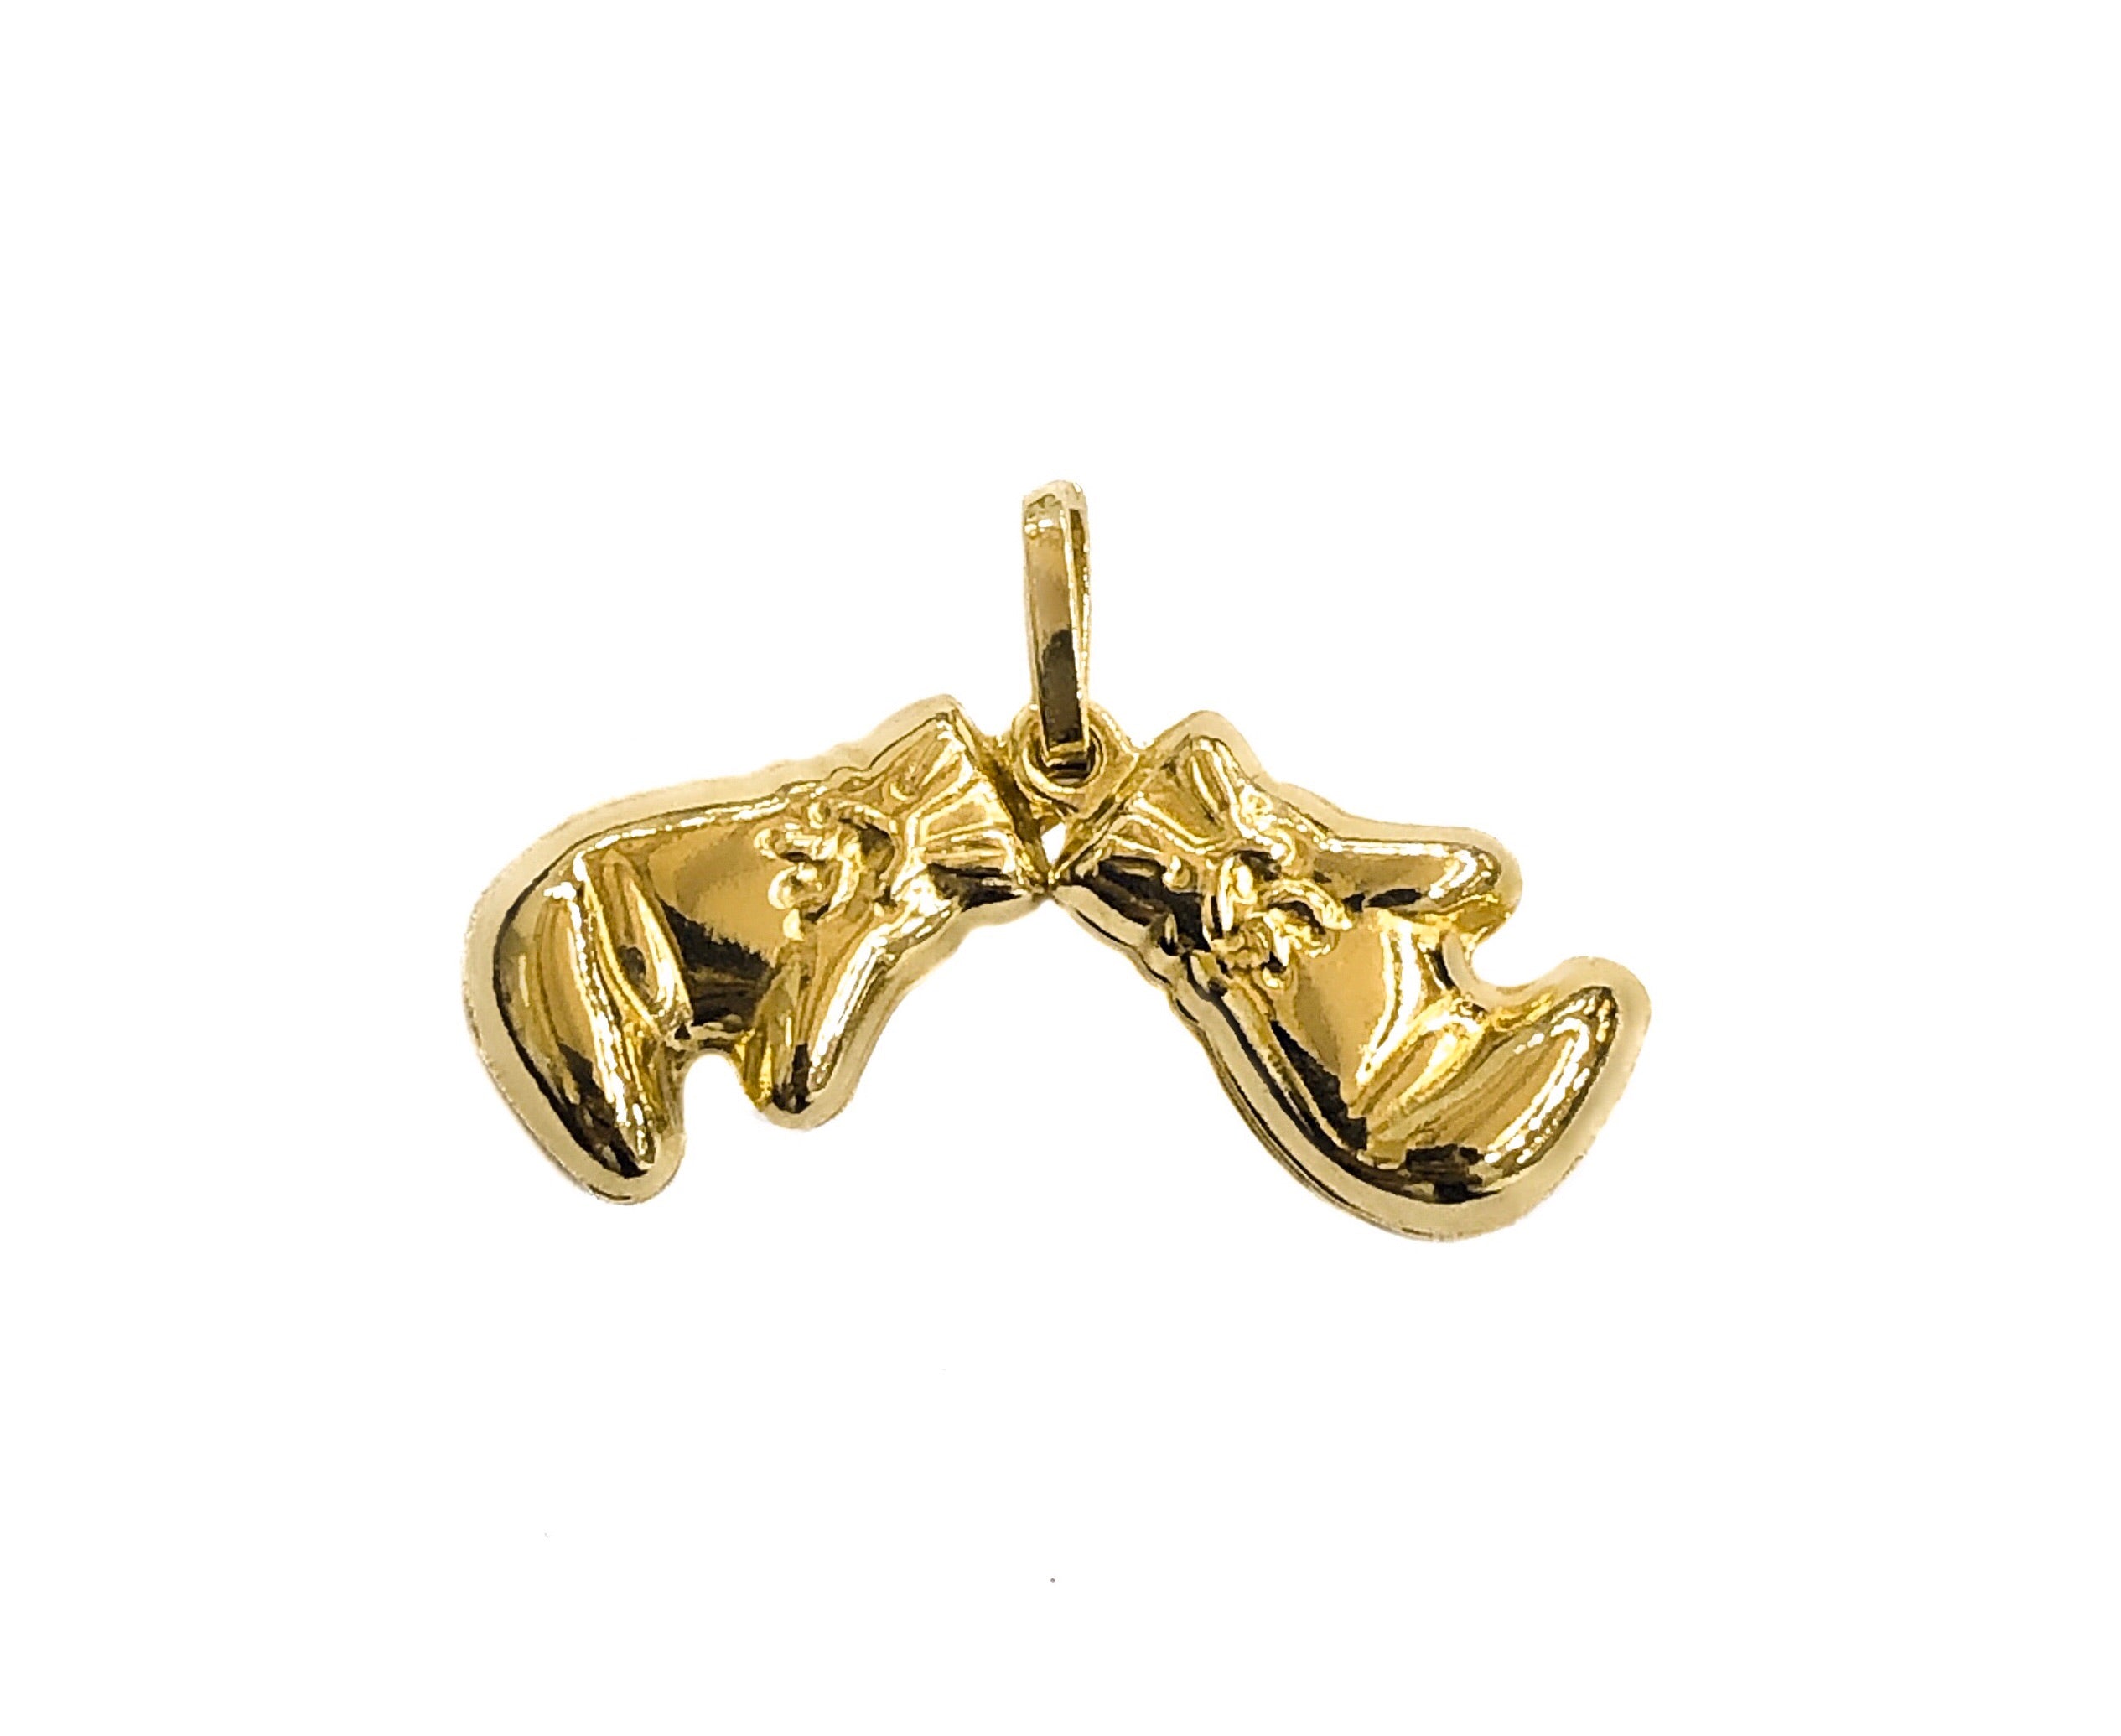 14k YELLOW GOLD PAIR OF BOXING GLOVES PENDANT